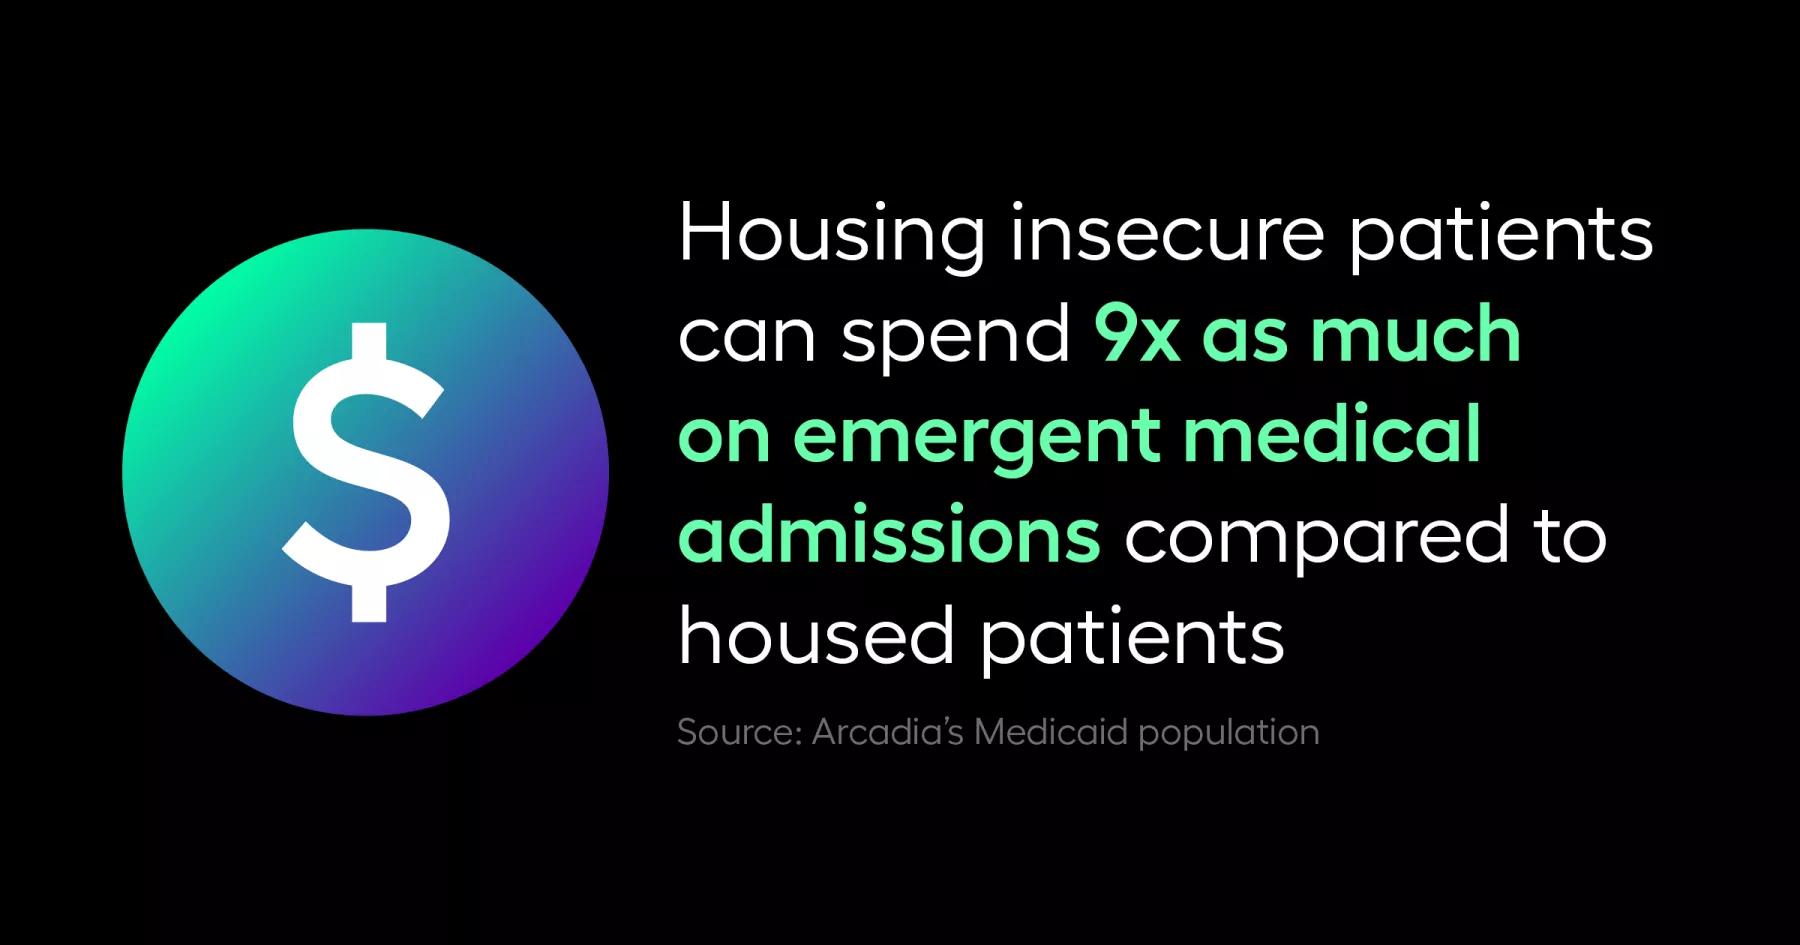 Housing insecure patients can spend nine times as much on emergent medical admissions when compared to housed patients